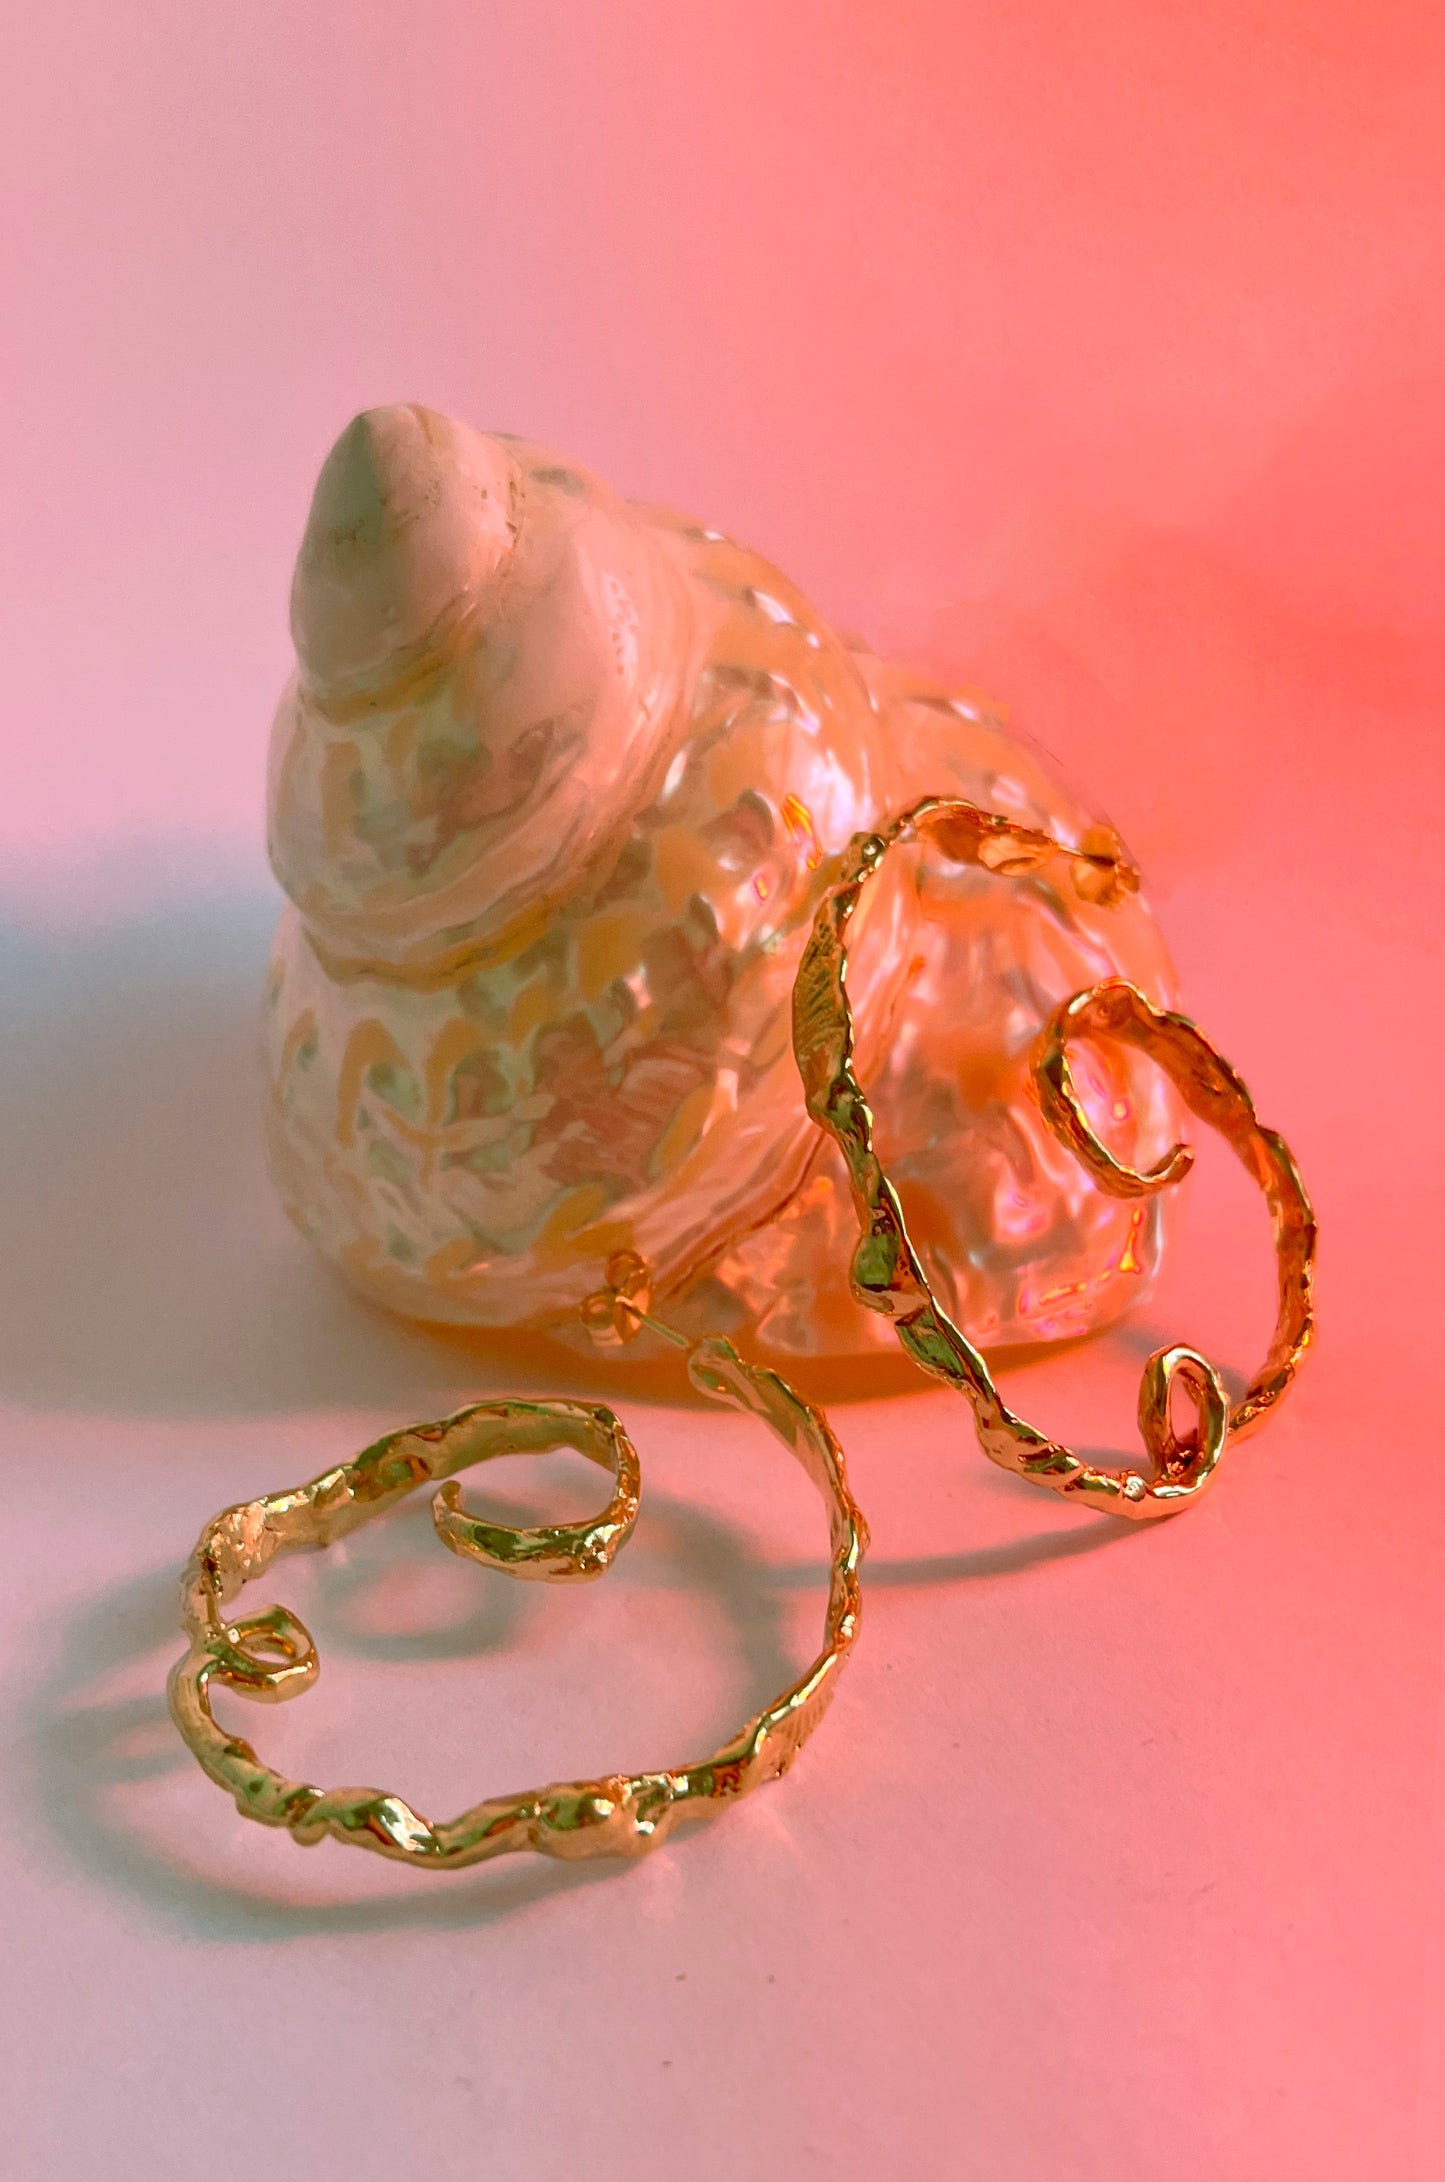 Product photo of the CLARK Andromeda Earring in 18K Gold Vermeil. Two organic hoops are balanced on a seashell. This is a red hue over this underwater scene. These earrings are hand craft using the lost wax casting technique. 